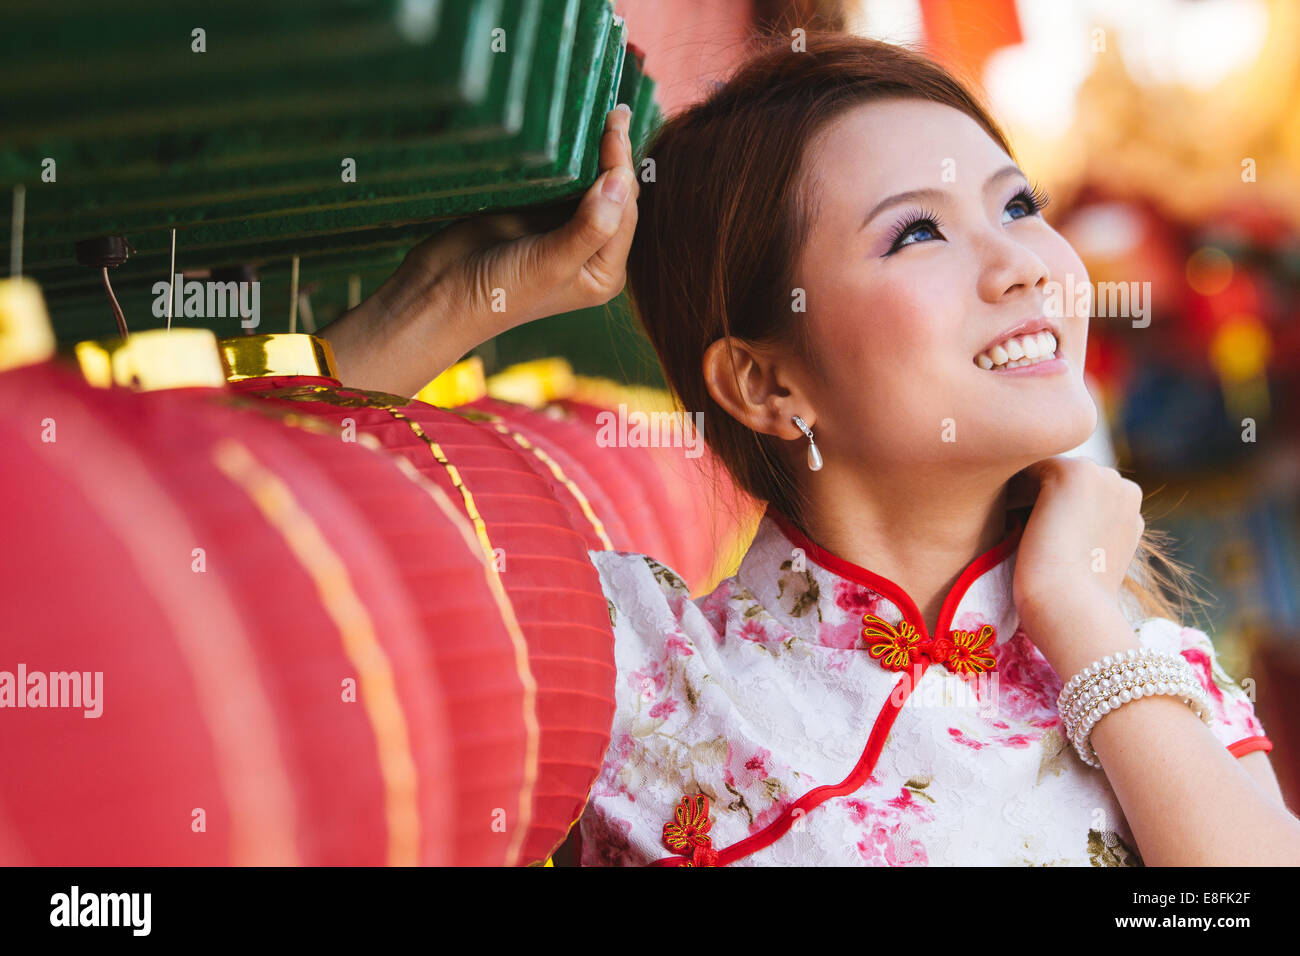 Portrait of young woman standing by Chinese paper lanterns Stock Photo